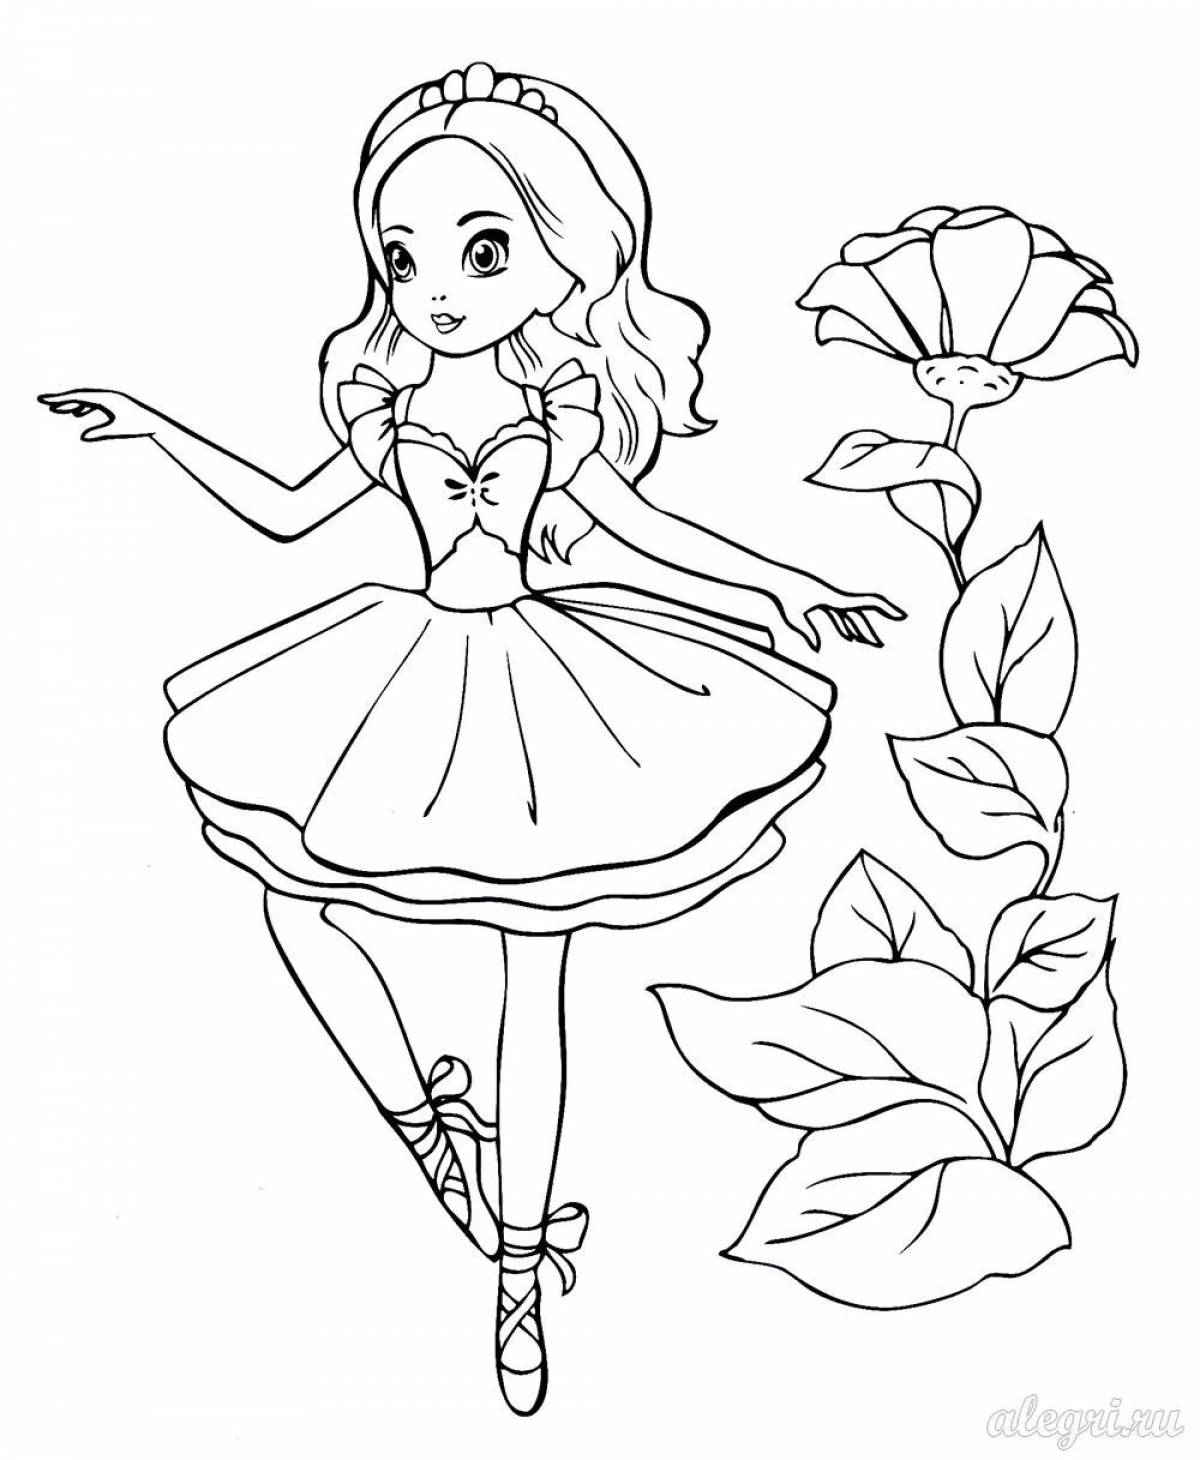 Coloring pages interesting for girls 8 years old